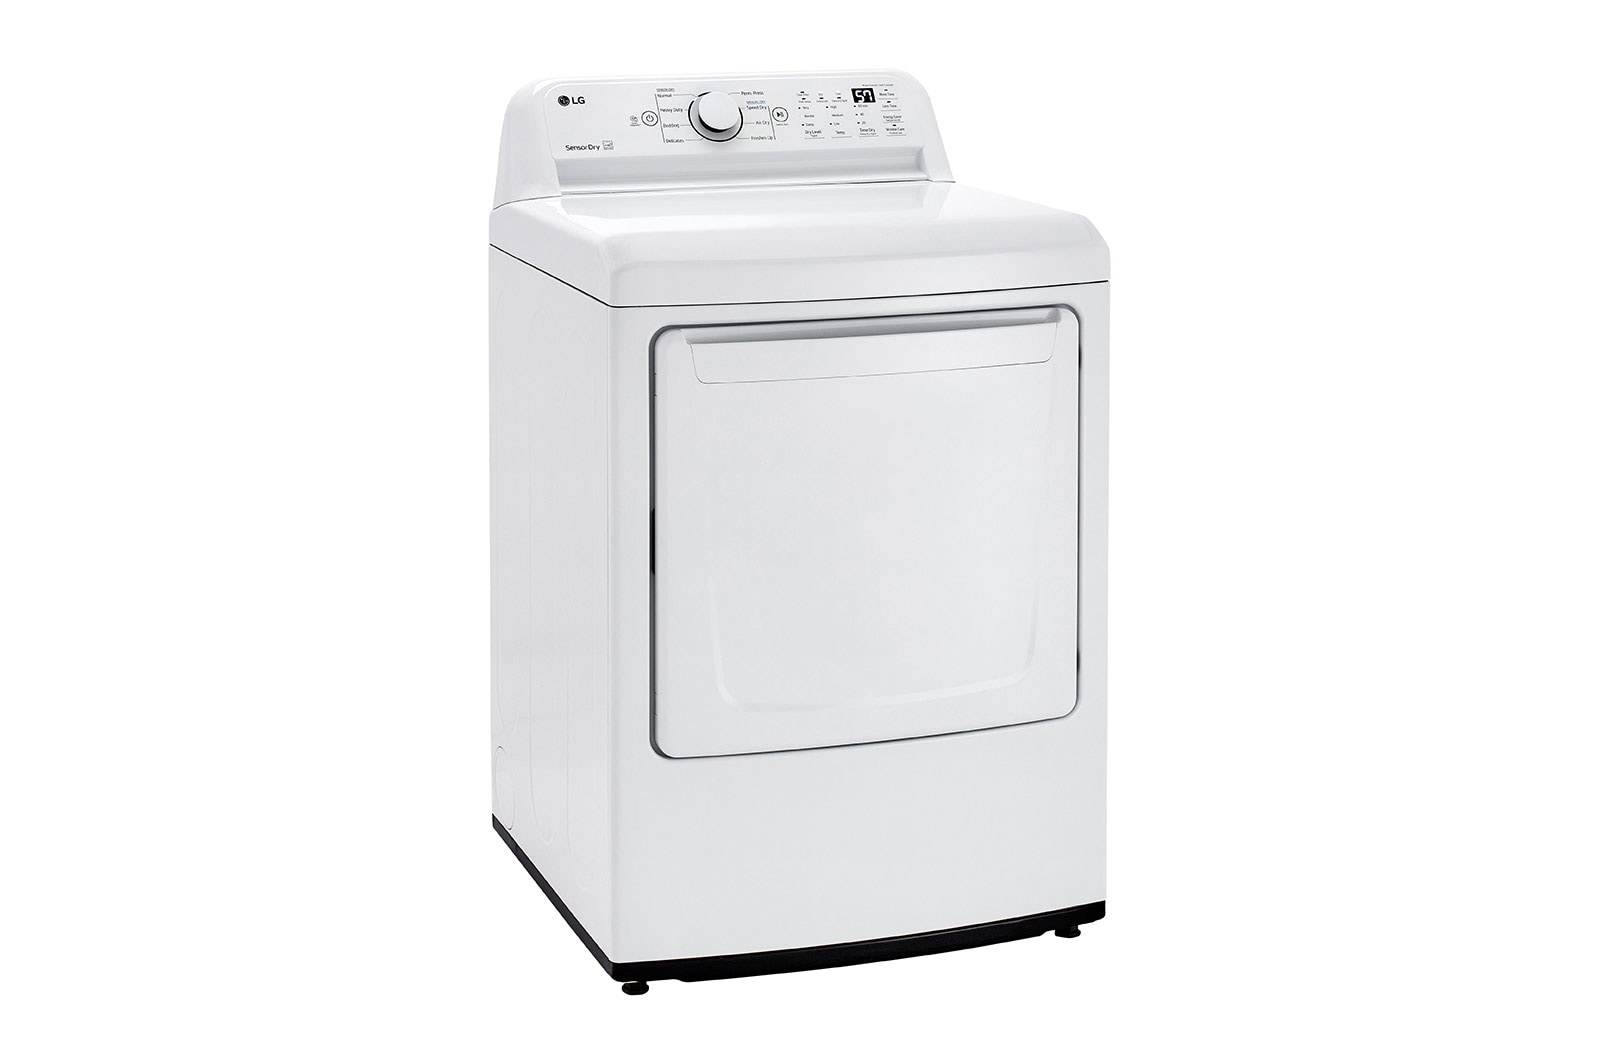 LG DLG7001W 7.3 cu. ft. Ultra Large Capacity Top Load Gas Dryer with